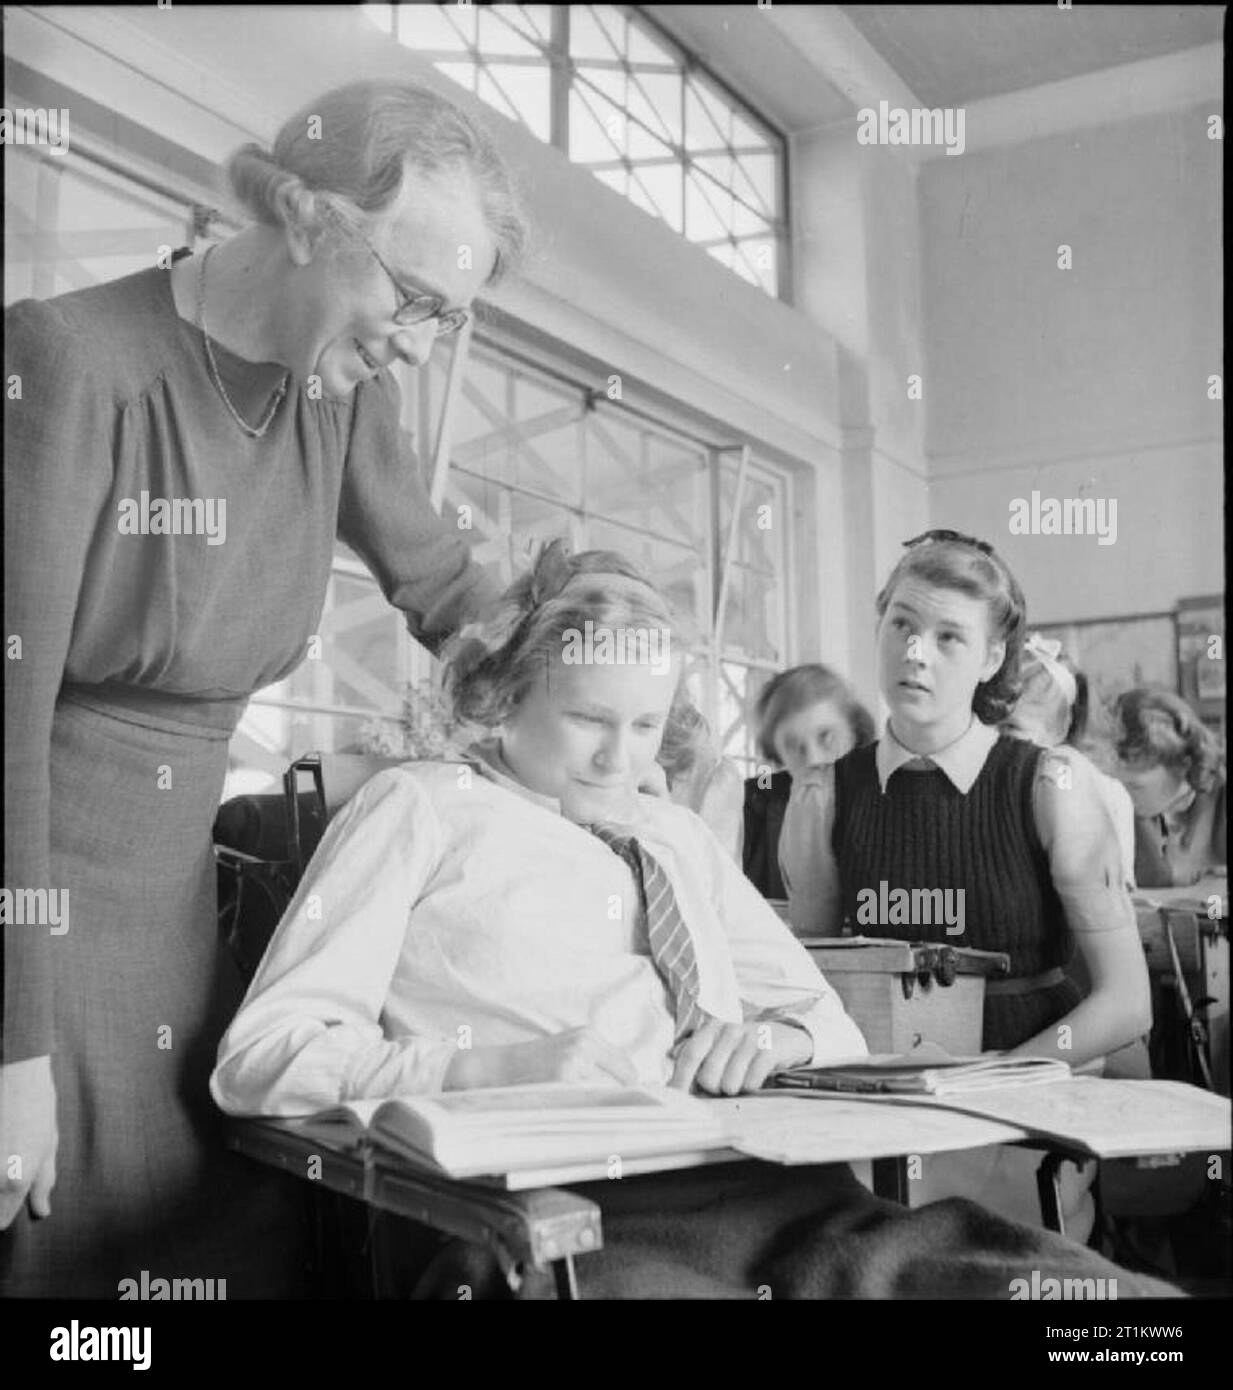 Young Britons Study American History- Education in Wartime England, 1943 History teacher Miss L M Molineux helps Monica Young with her work during a lesson on American History at Albany Senior School in Enfield. Monica is disabled, and has a writing desk balanced on the arms of her wheelchair, on which to write. The glass panels separating the classroom from the corridor have criss-crosses of tape to prevent blast damage. Stock Photo